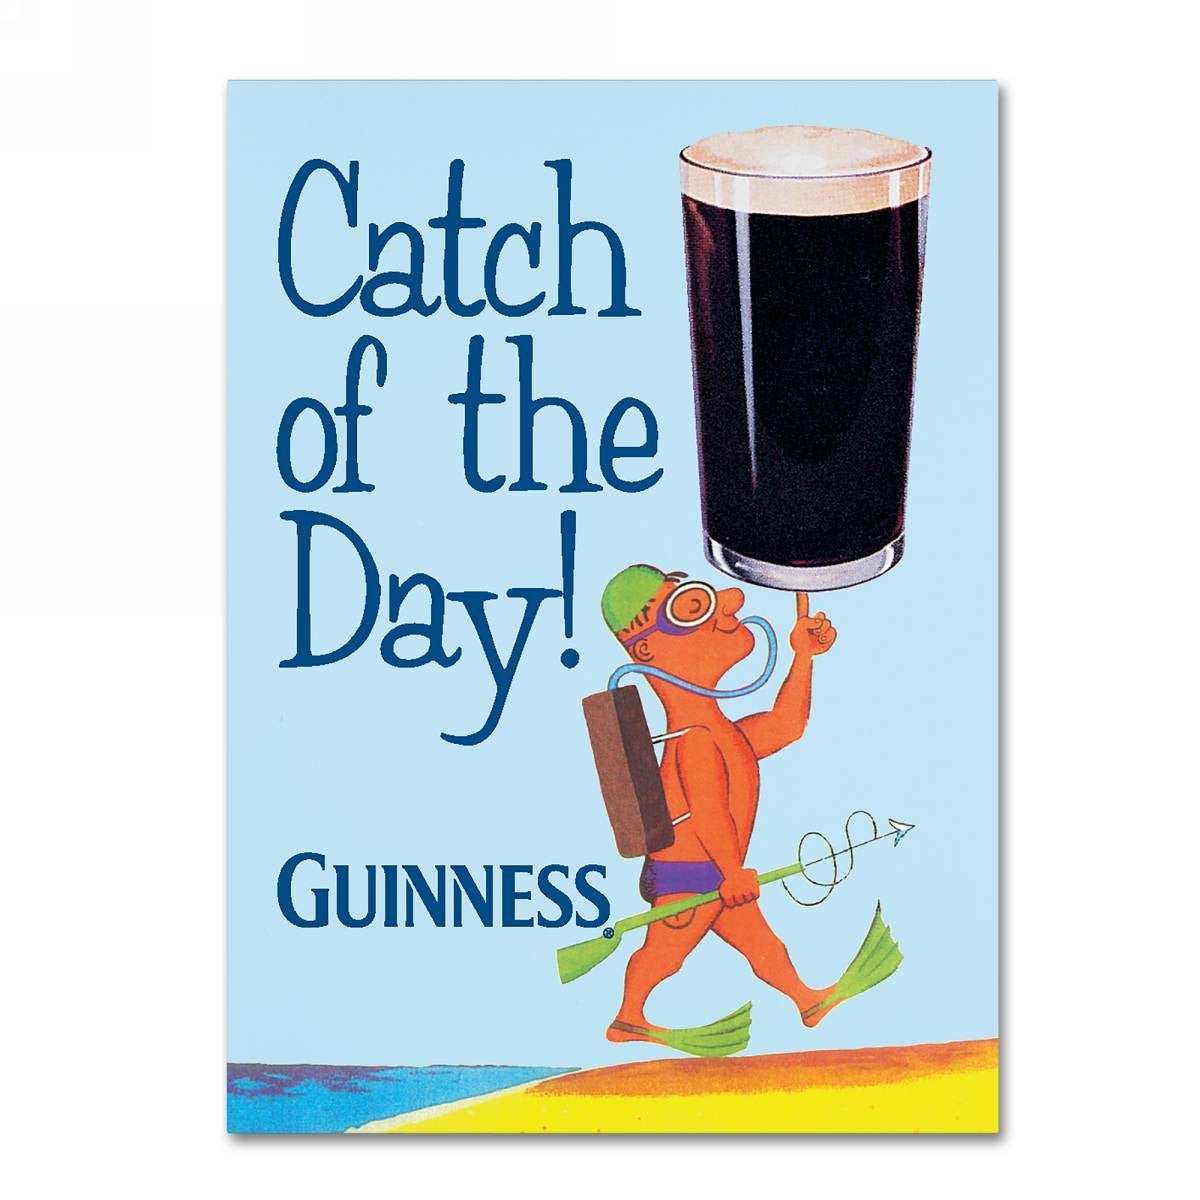 A card that says "Catch of the Day" with a Guinness Brewery 'Catch Of The Day' Canvas Art.